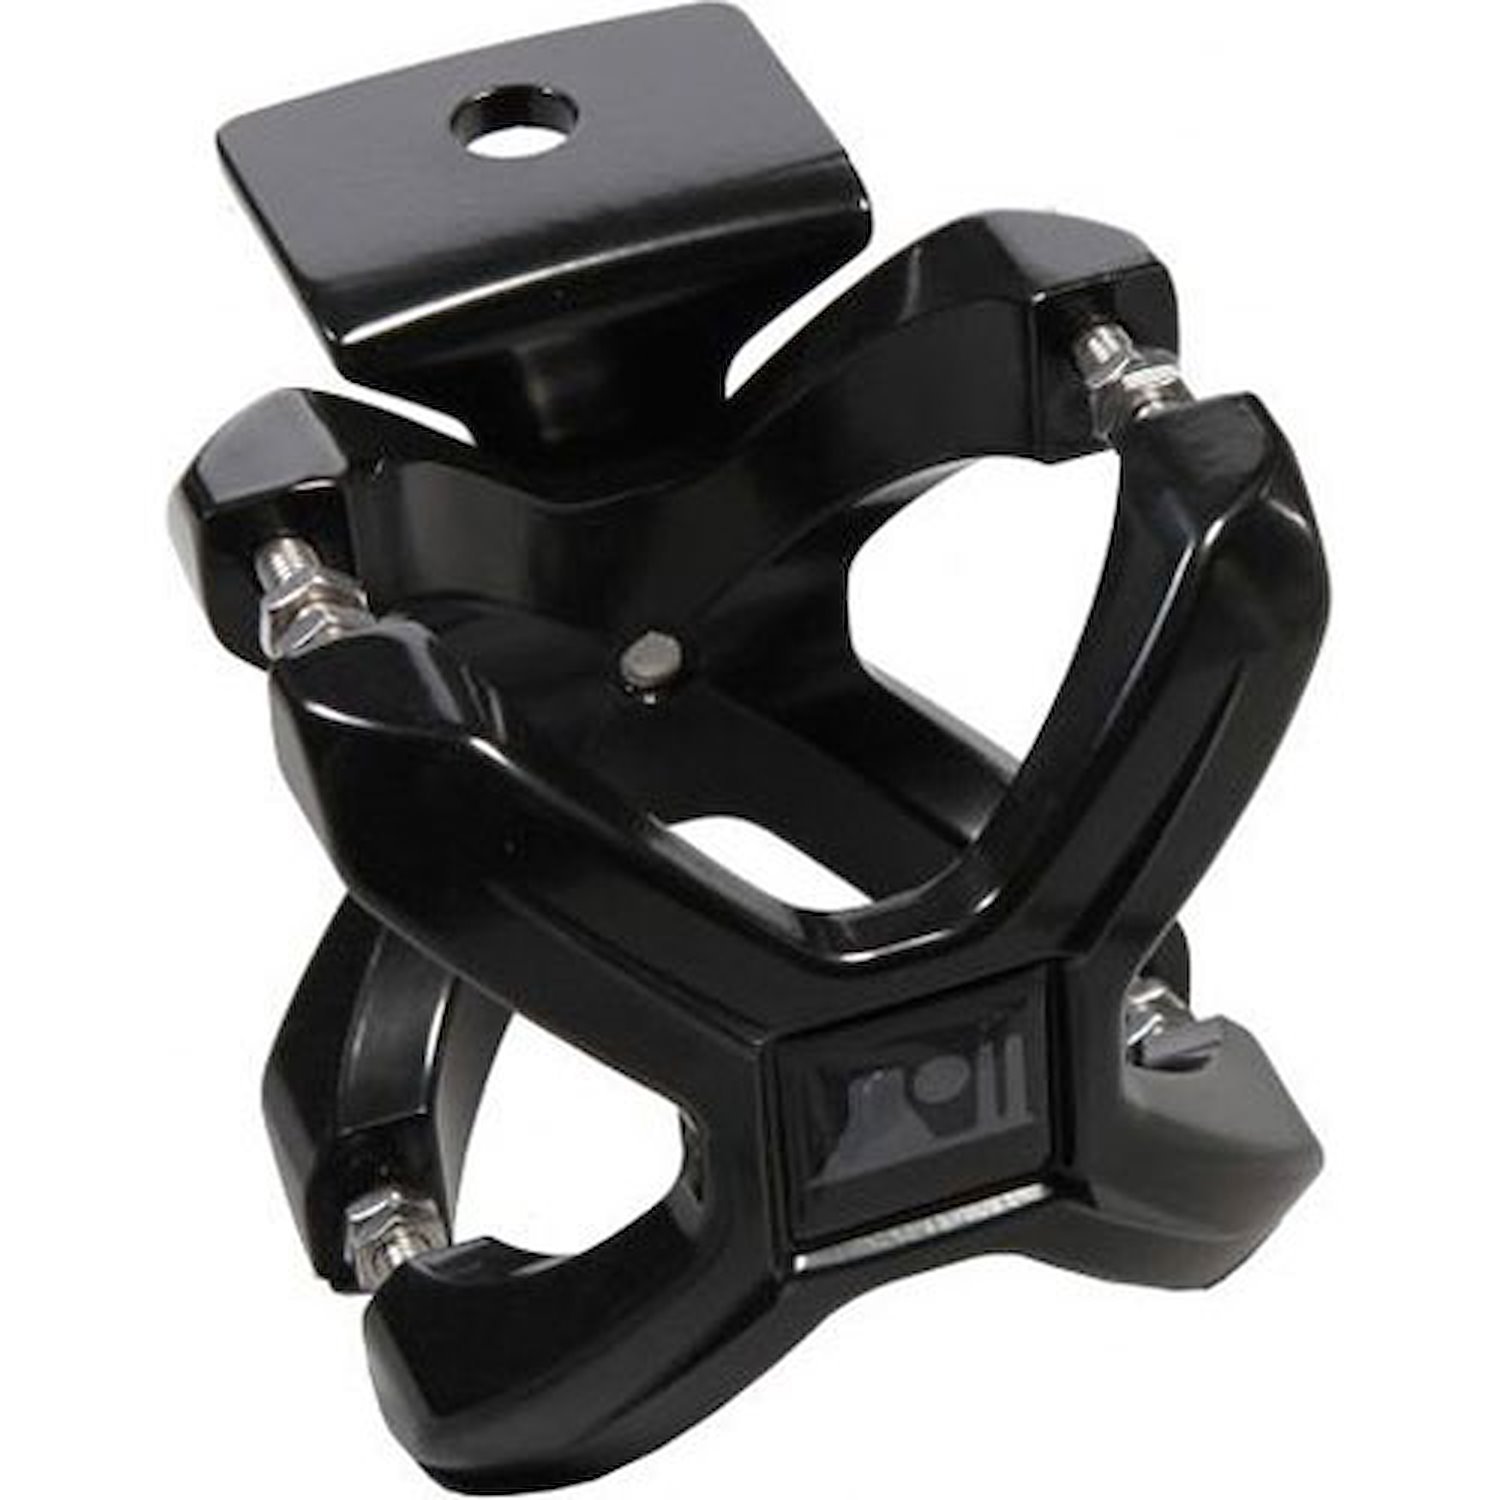 X-Clamp Light Mounting Bracket, Gloss Black [Fits 2.250 in. to 3 in. Round Tubing]